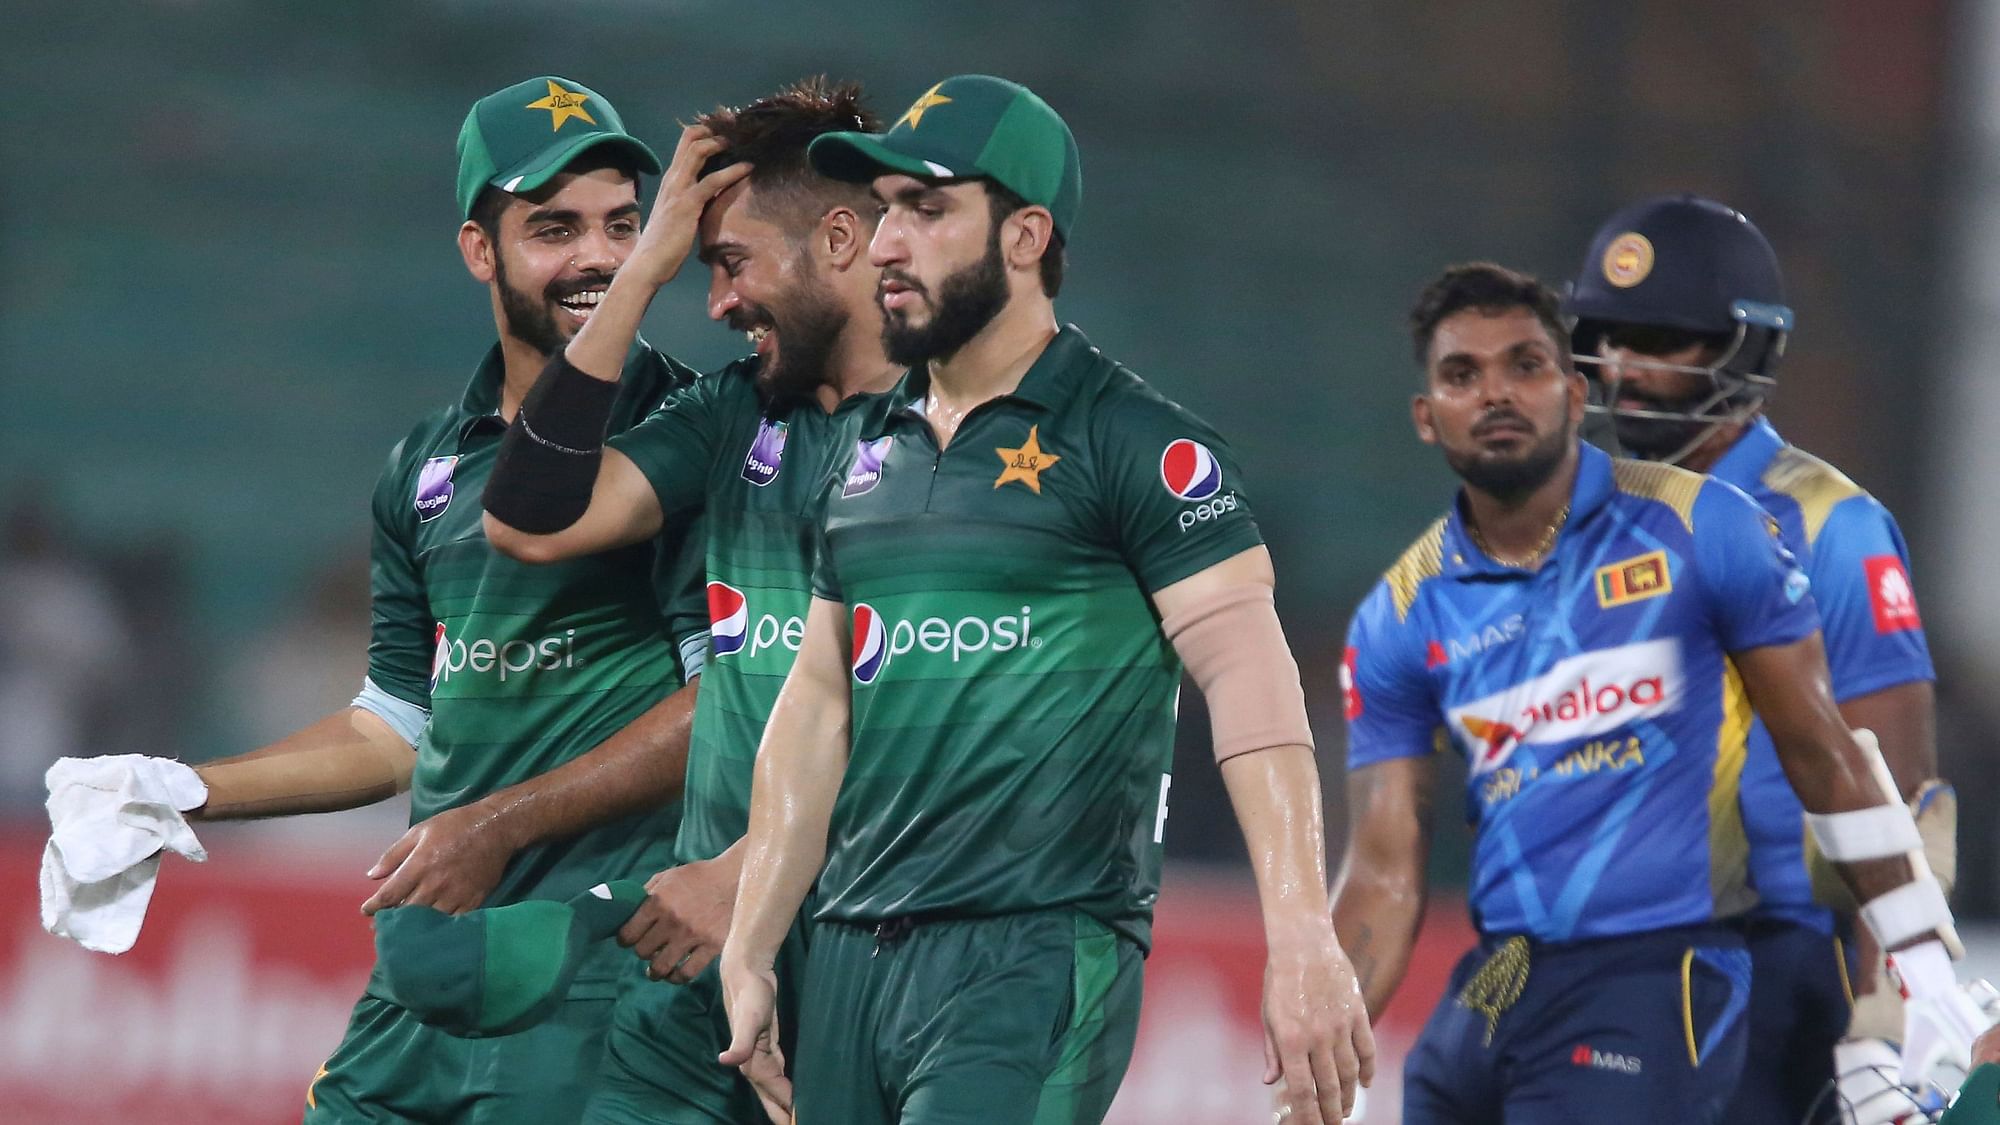 Pakistan marked the return of ODI cricket in Karachi after 10 years with a 67-run victory over Sri Lanka.